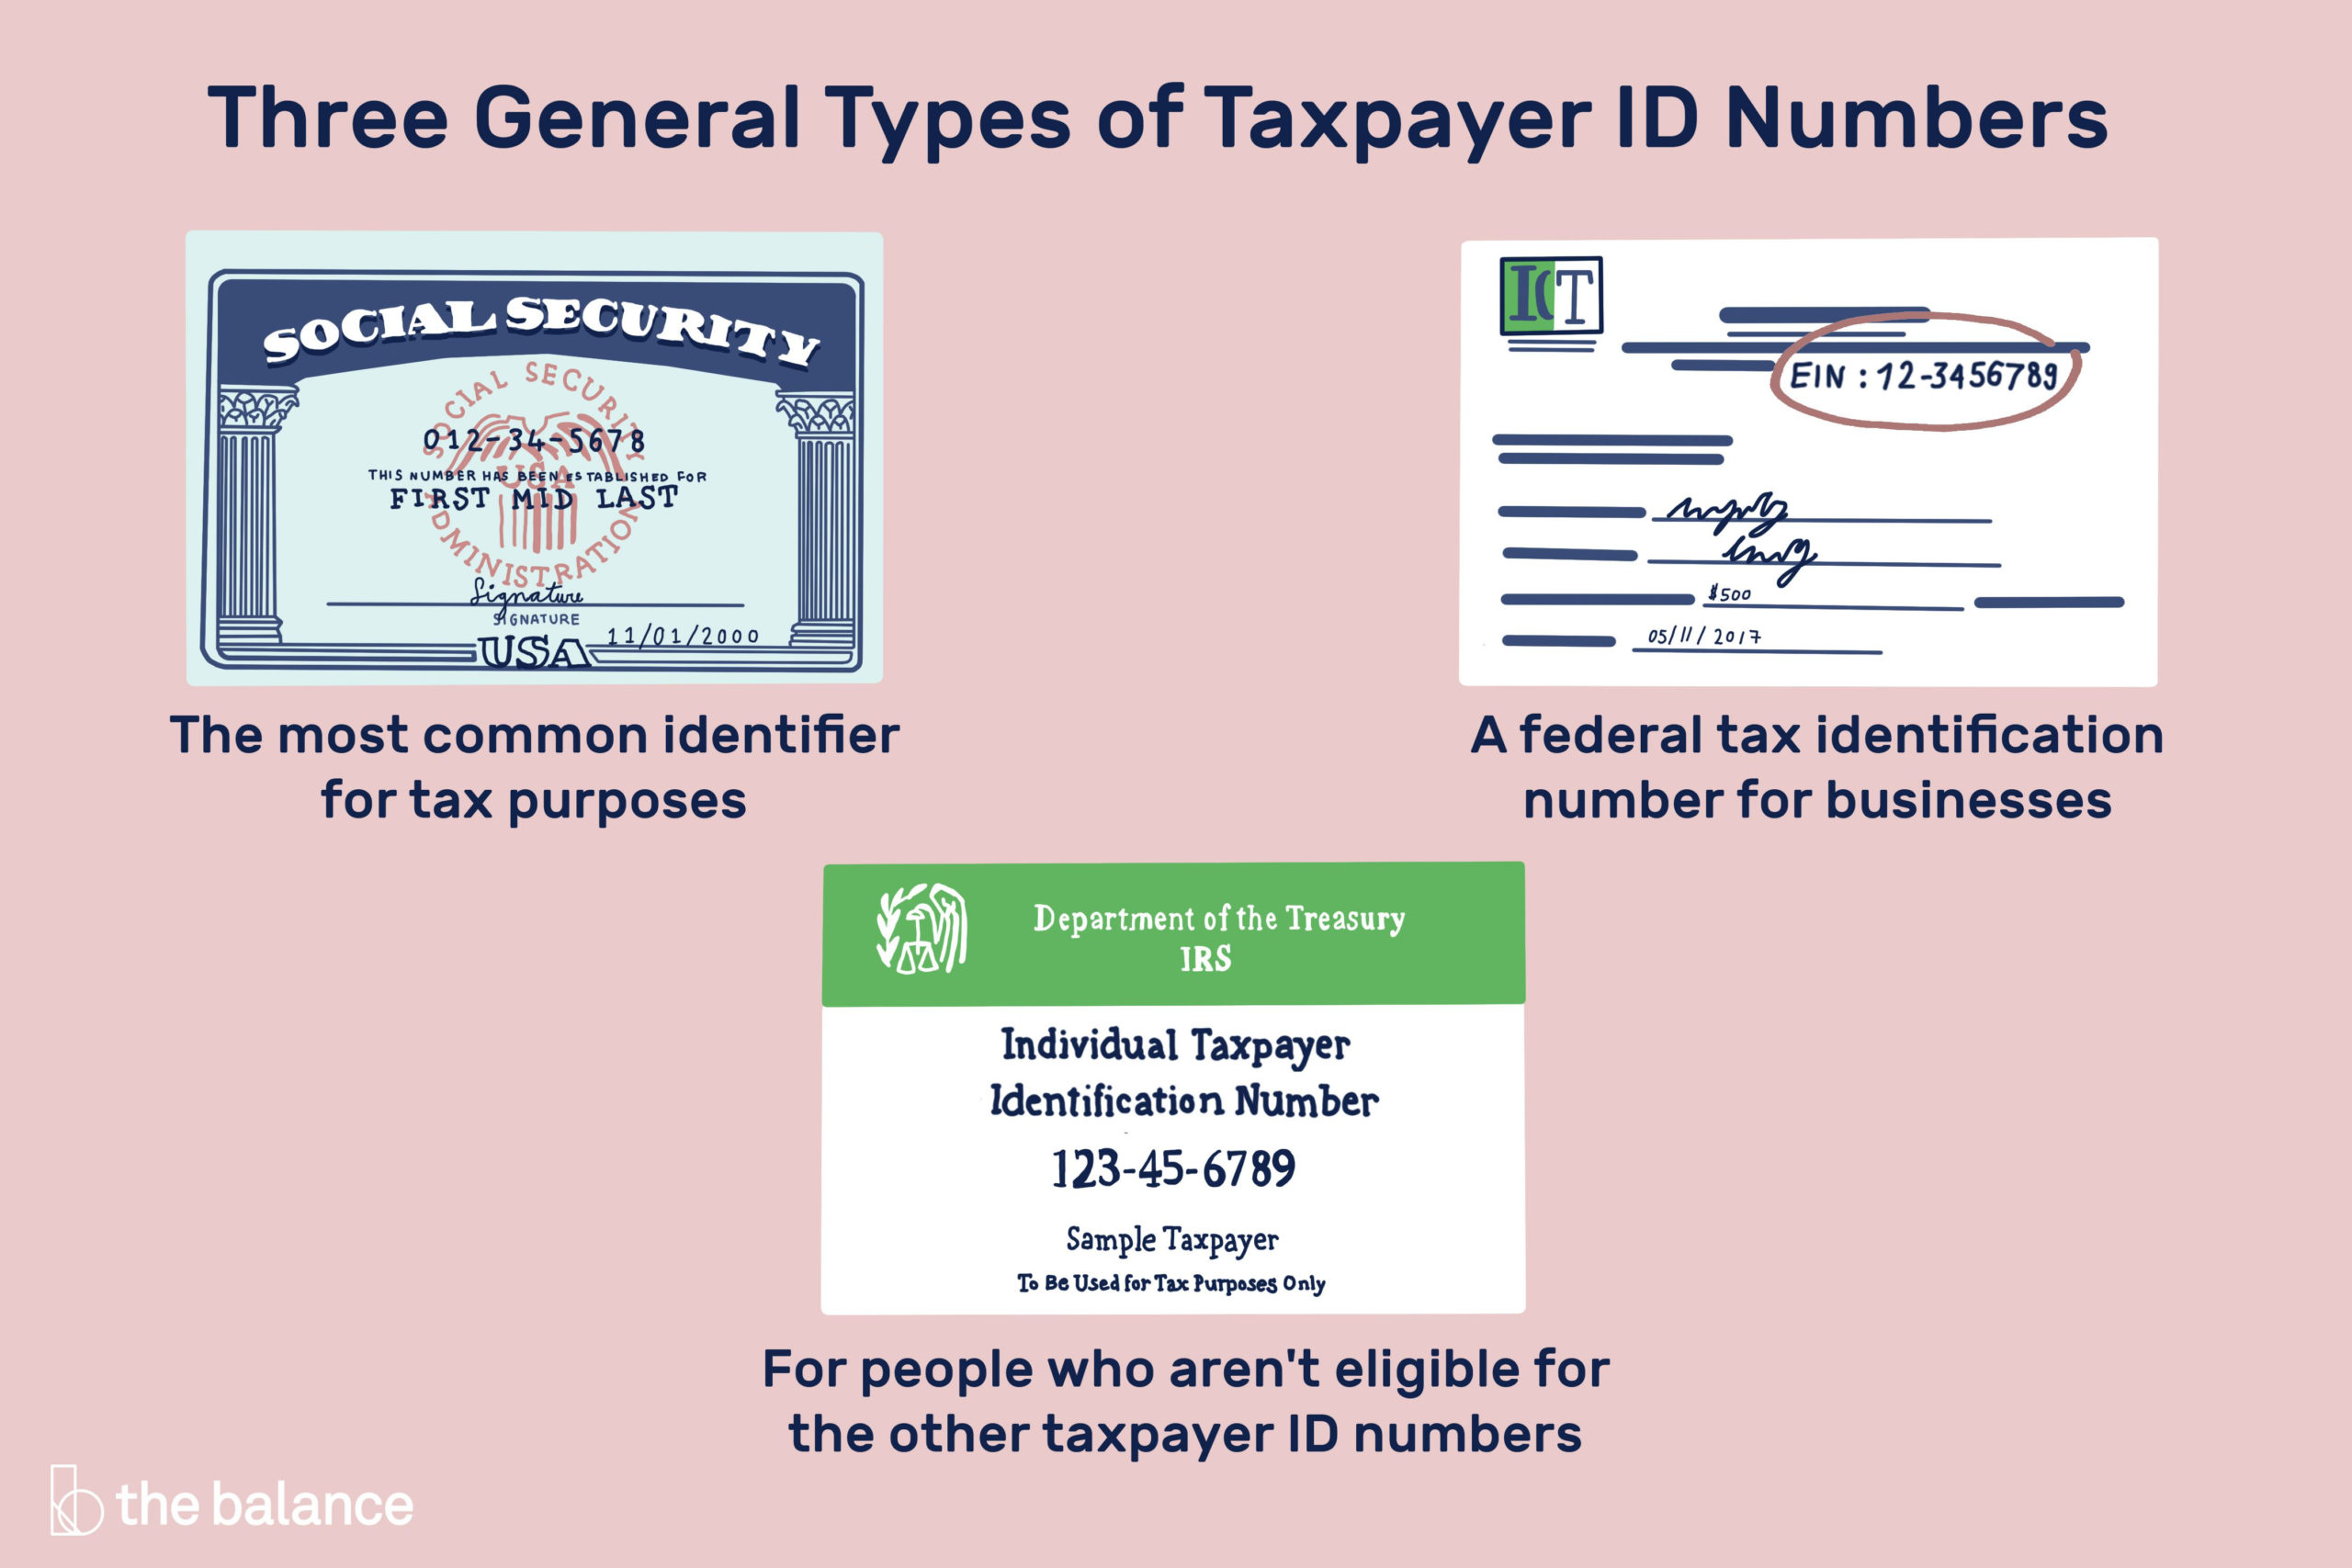 Tax IDentification Number And Social Security